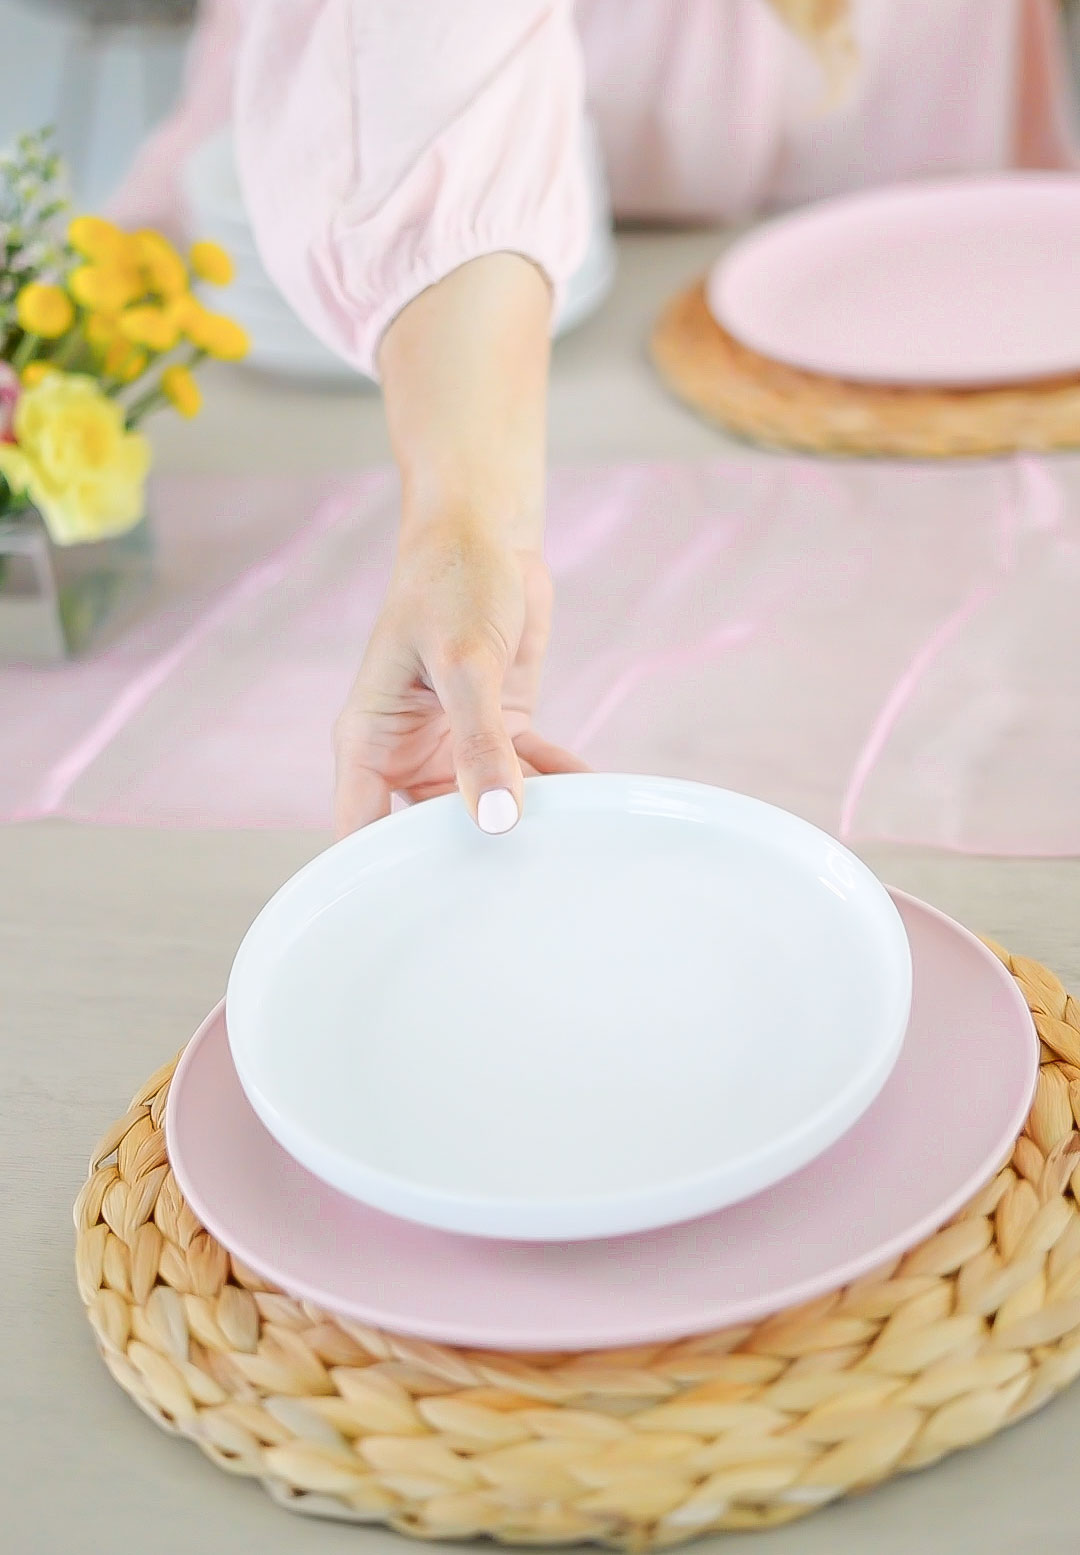 Florida lifestyle and home blogger Jill DiGioia shares an easy spring tablescape layering woven placemats, pink plates, and white plates.